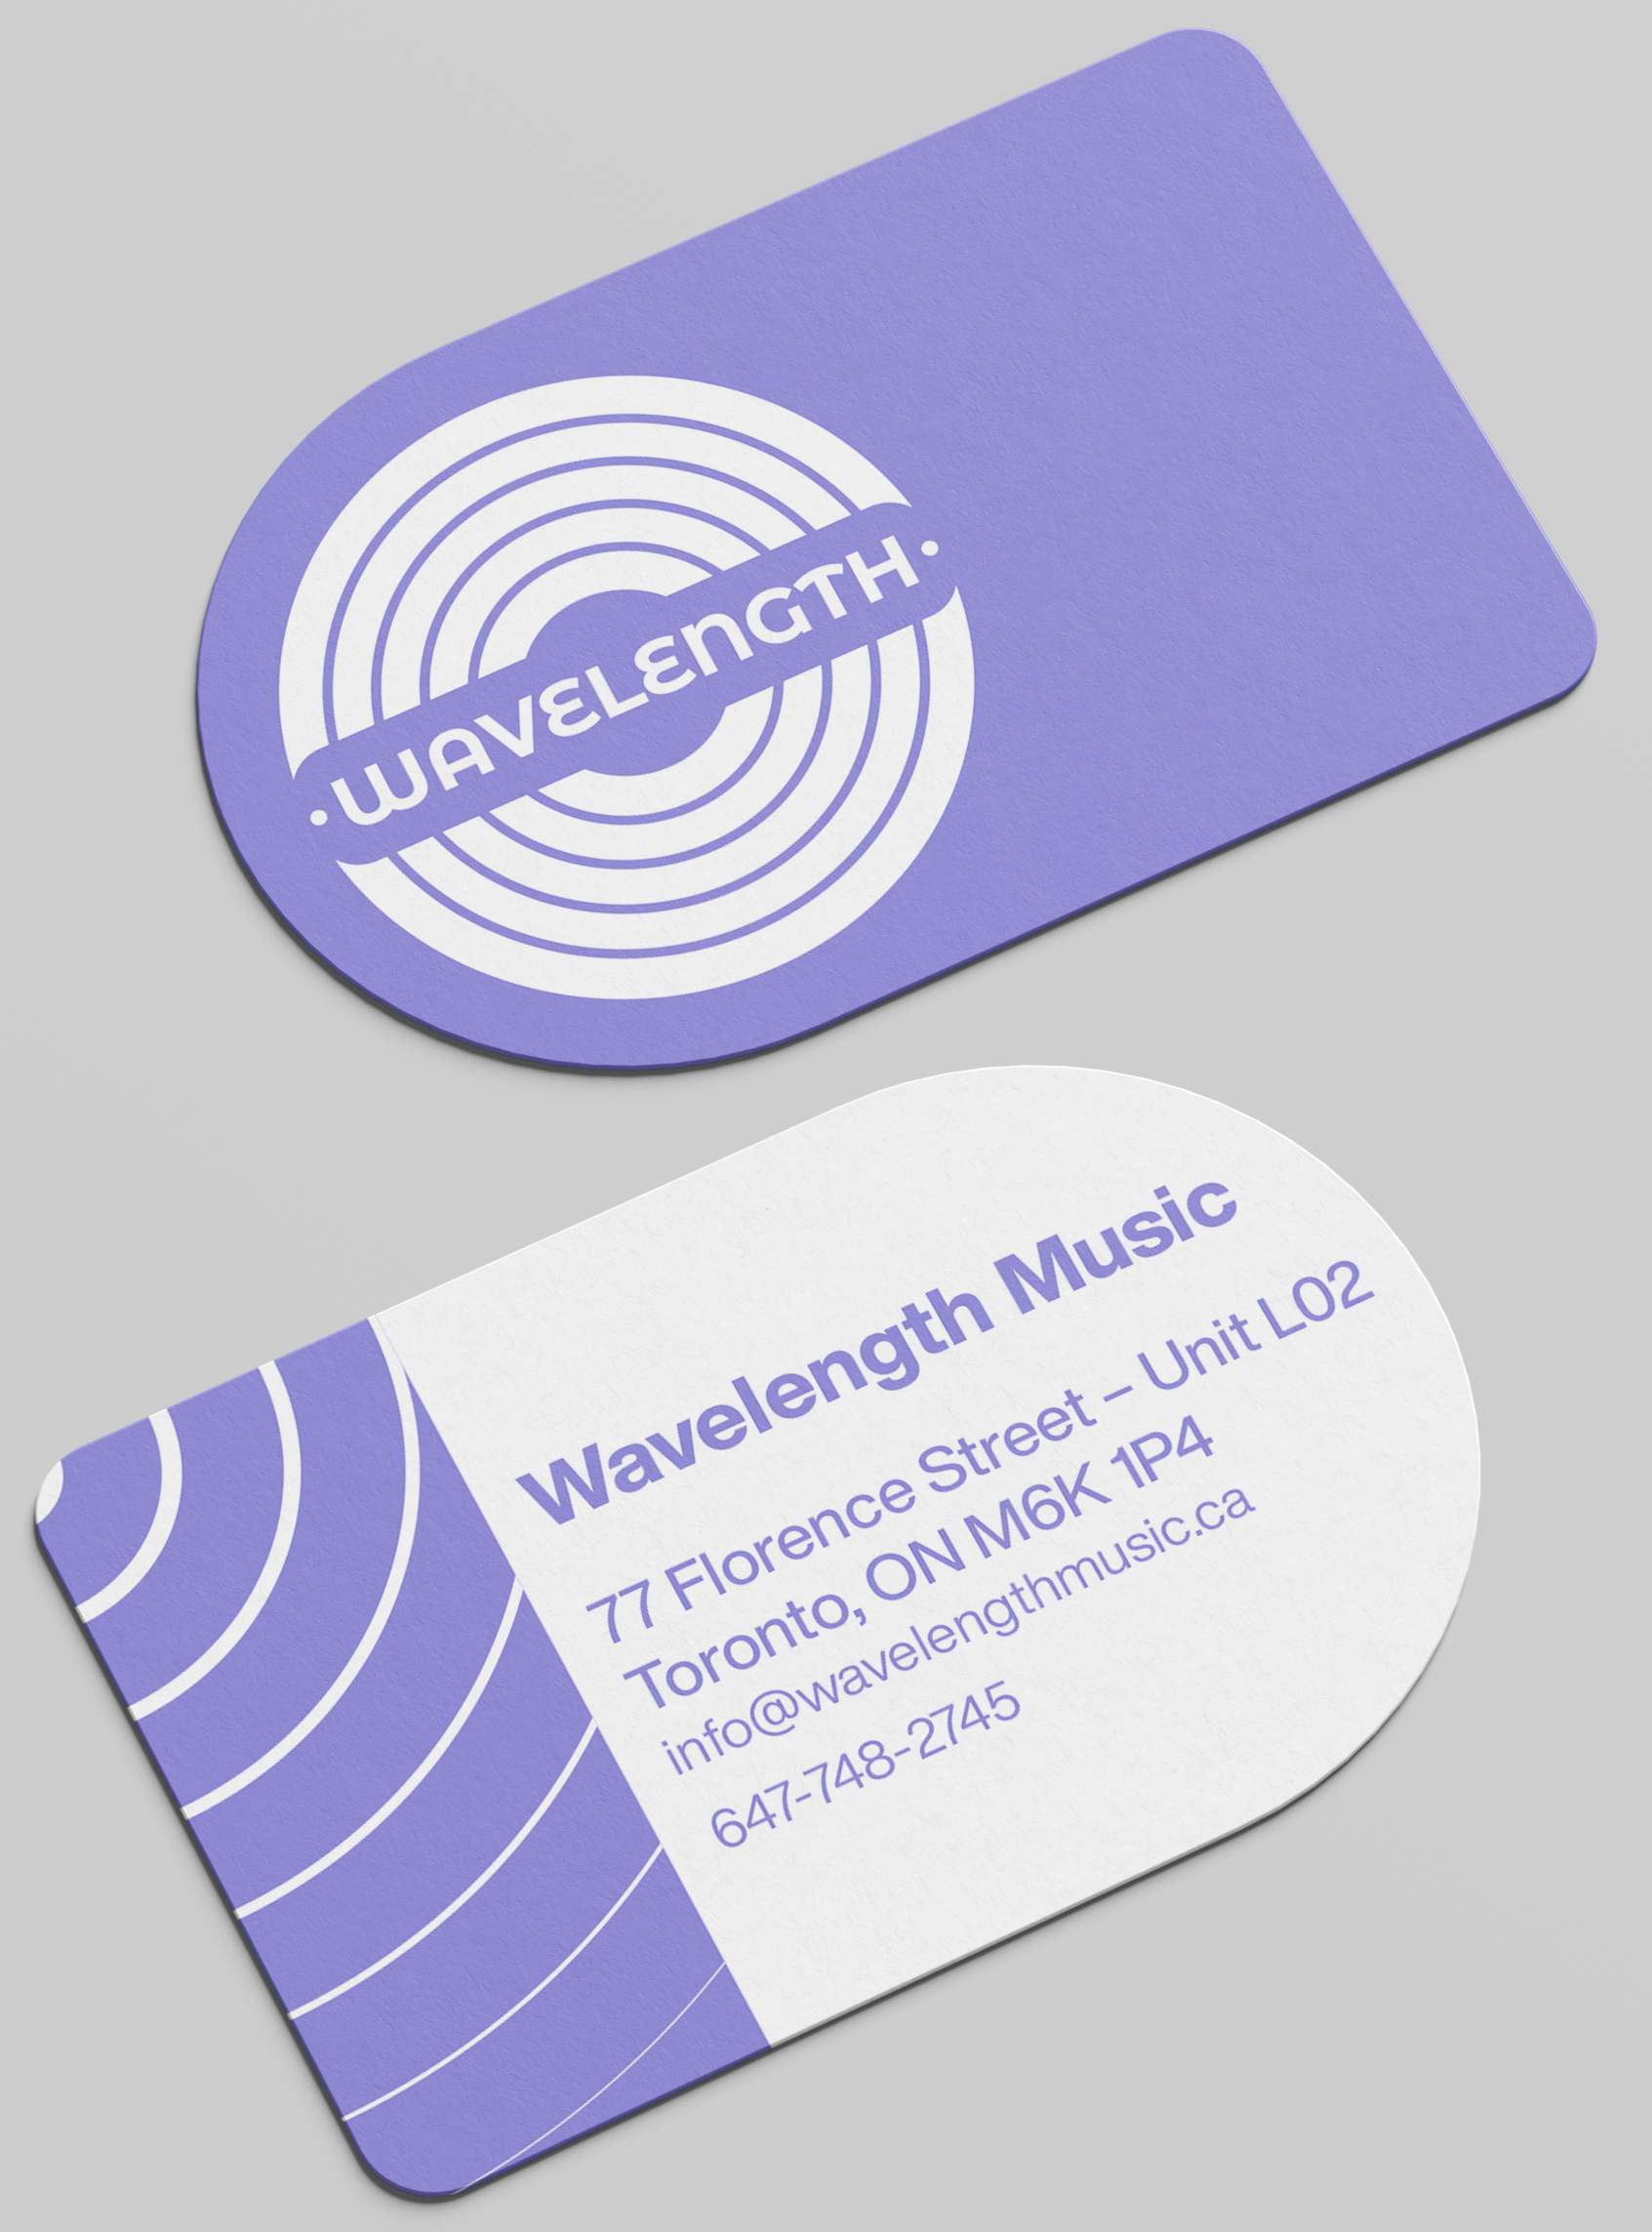 A logo mockup on a rounded business card. The logo is for Wavelength, and is purple.